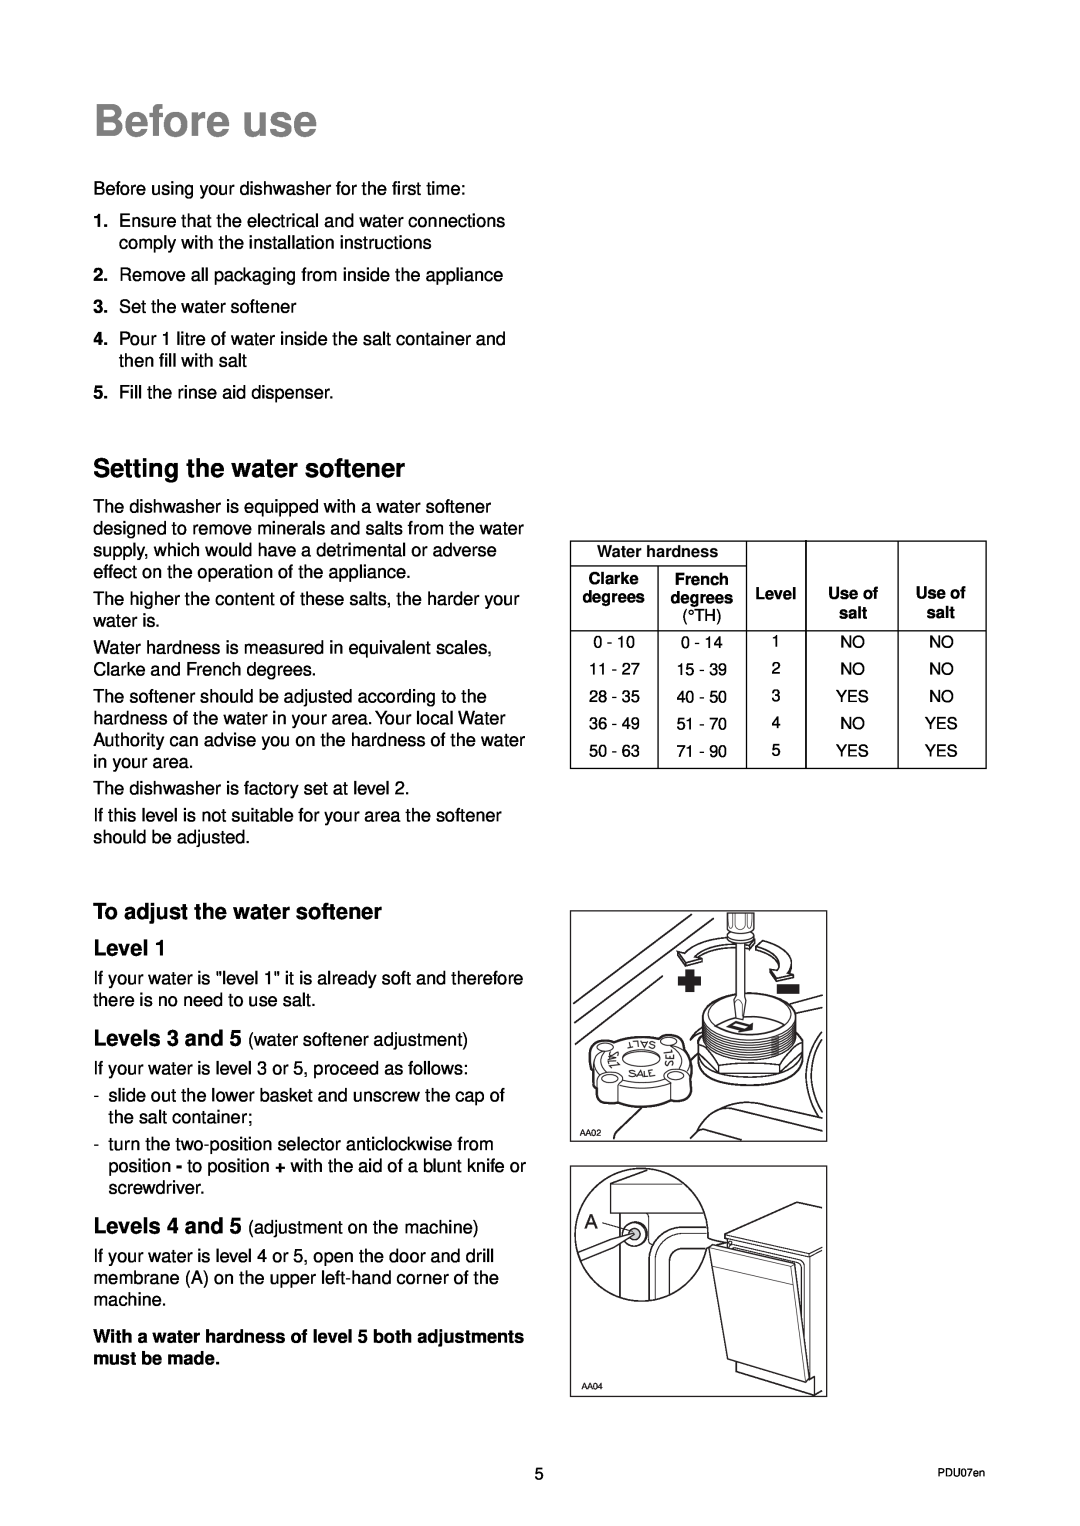 Zanussi DW 914 manual Before use, Setting the water softener, To adjust the water softener Level 